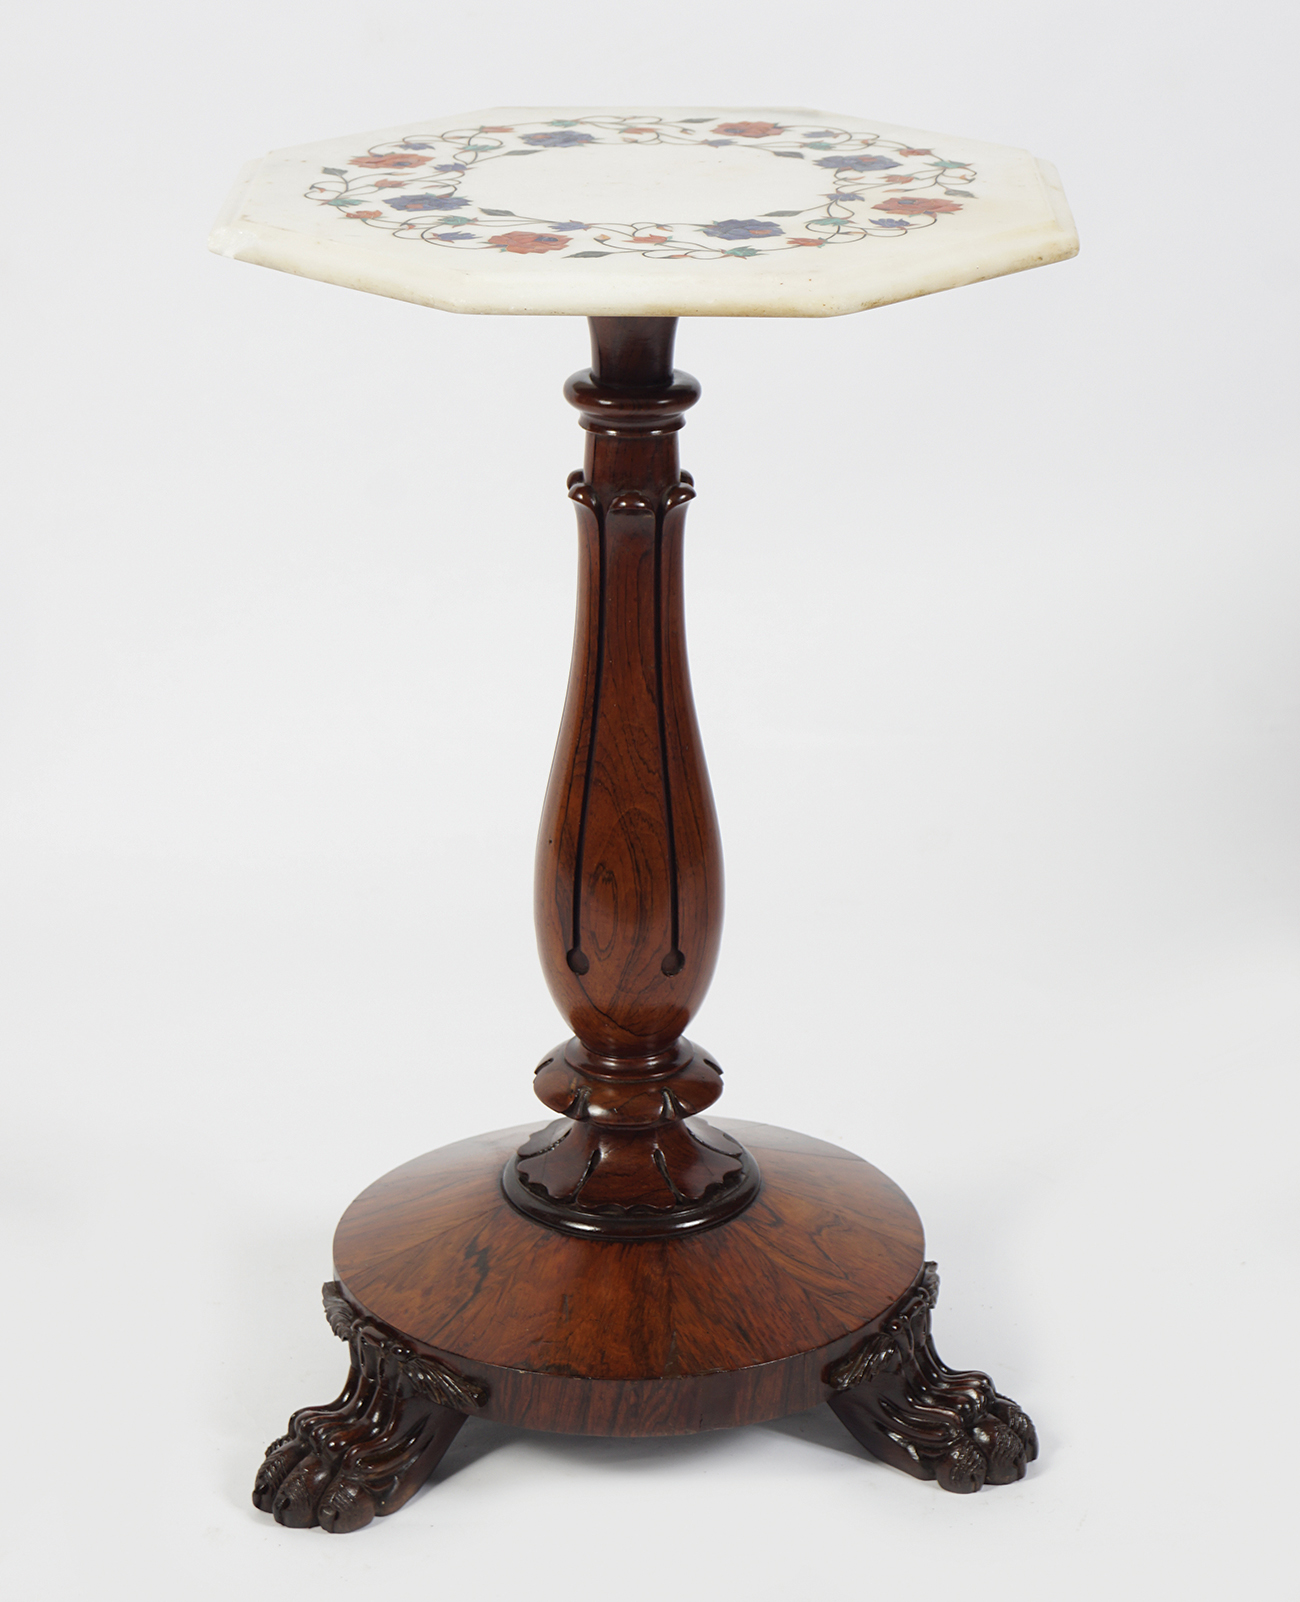 19TH-CENTURY SPECIMEN MARBLE AND ROSEWOOD TABLE